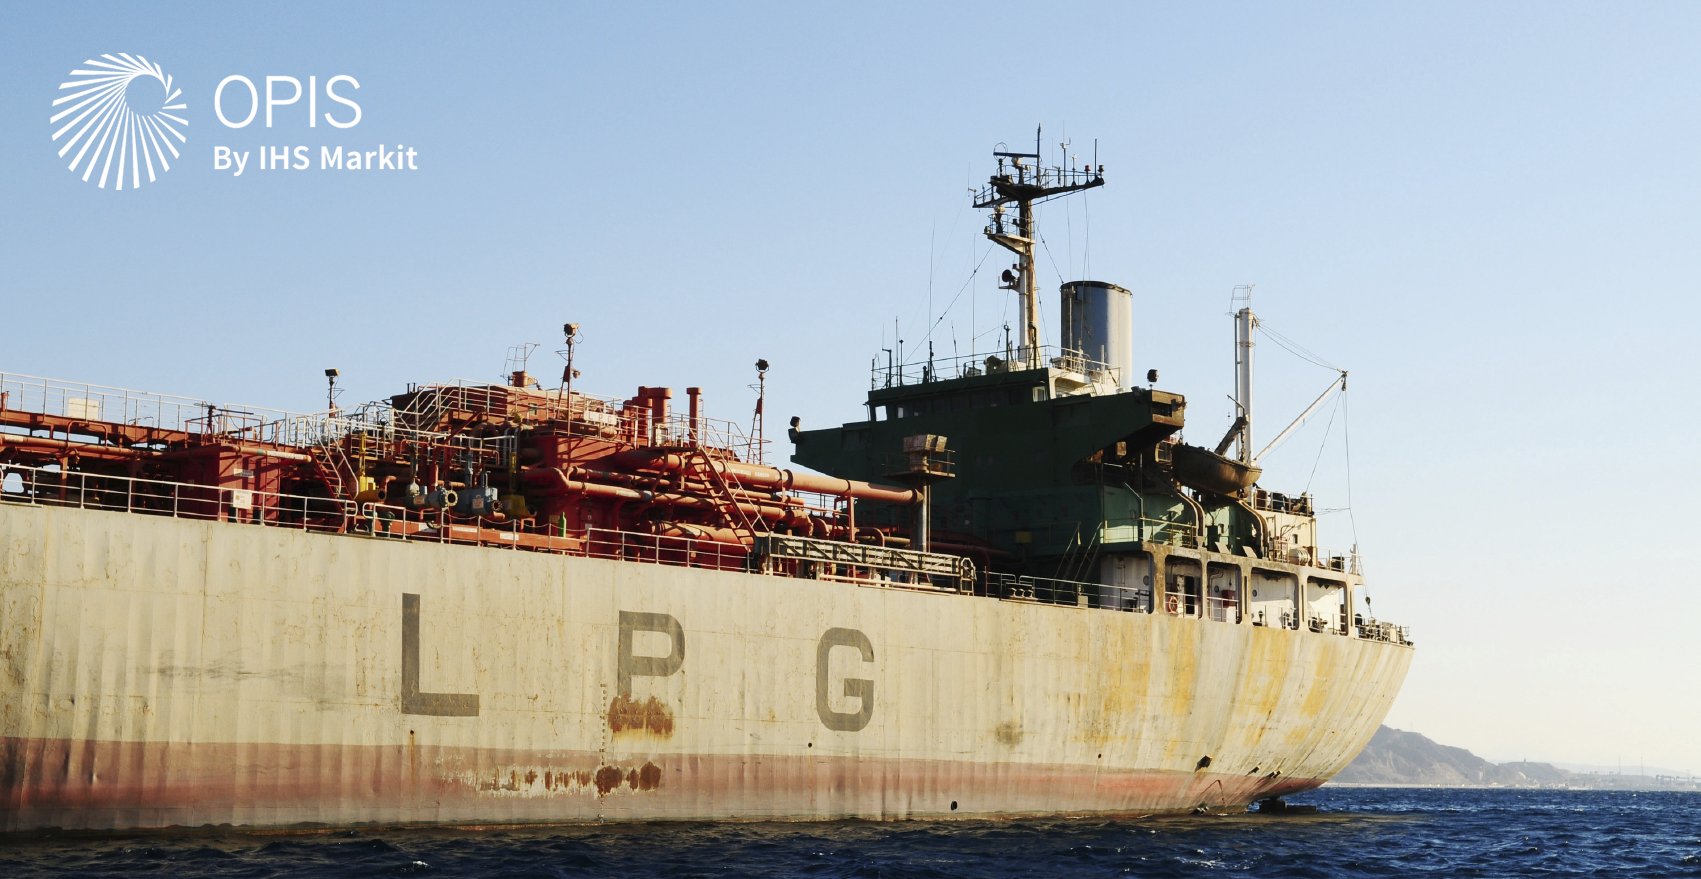 2019 LPG Price Preview for U.S., Europe and Asia